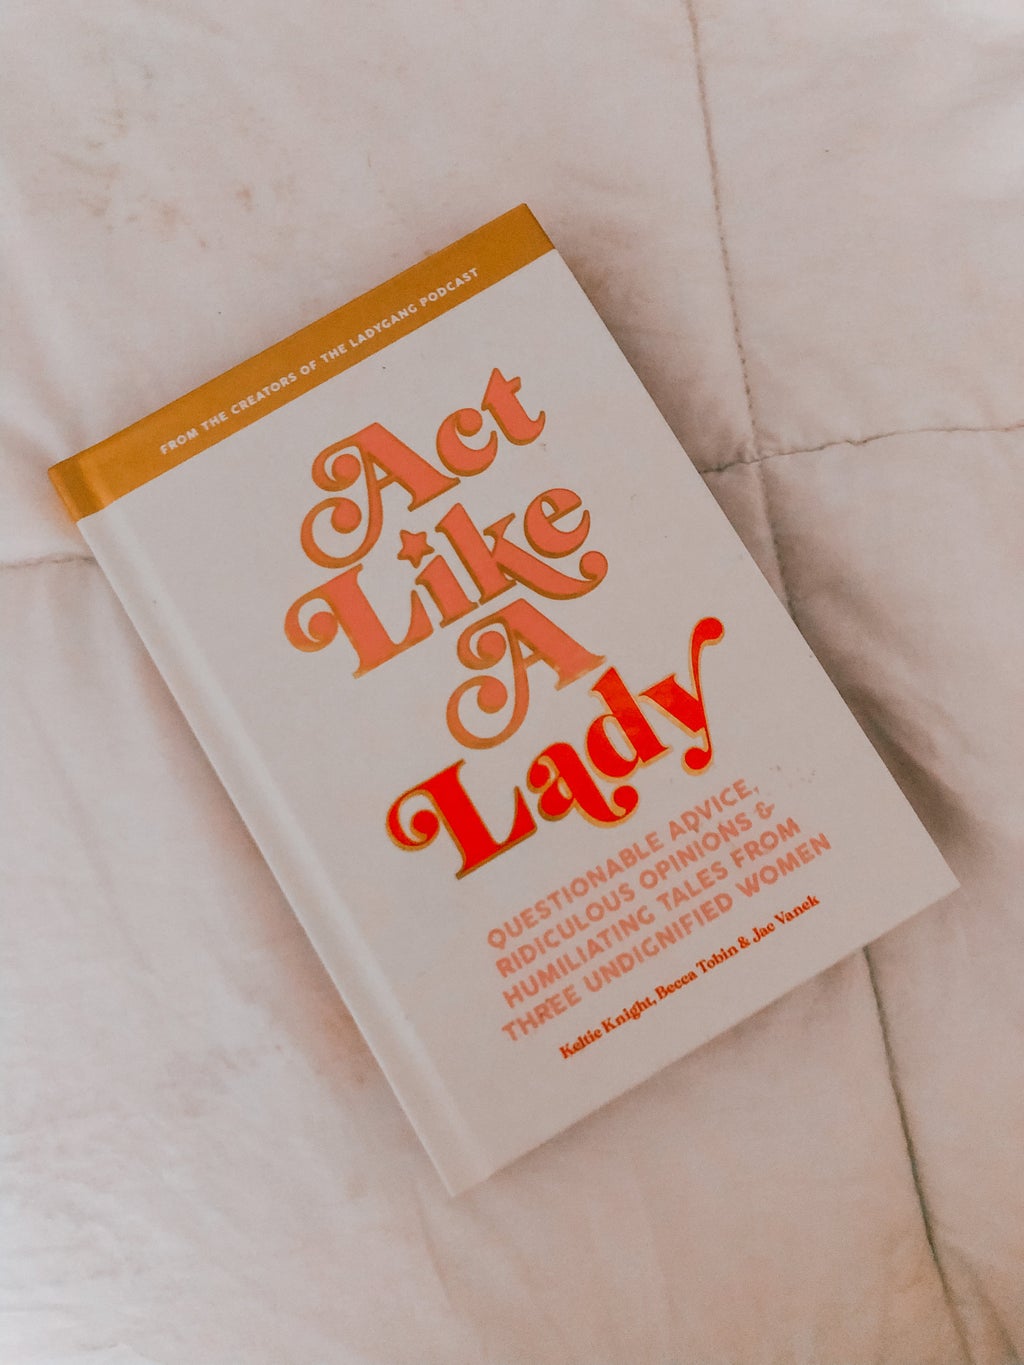 Act Like a Lady: Questionable Advice, Ridiculous Opinions, and Humiliating Tales from Three Undignified Women